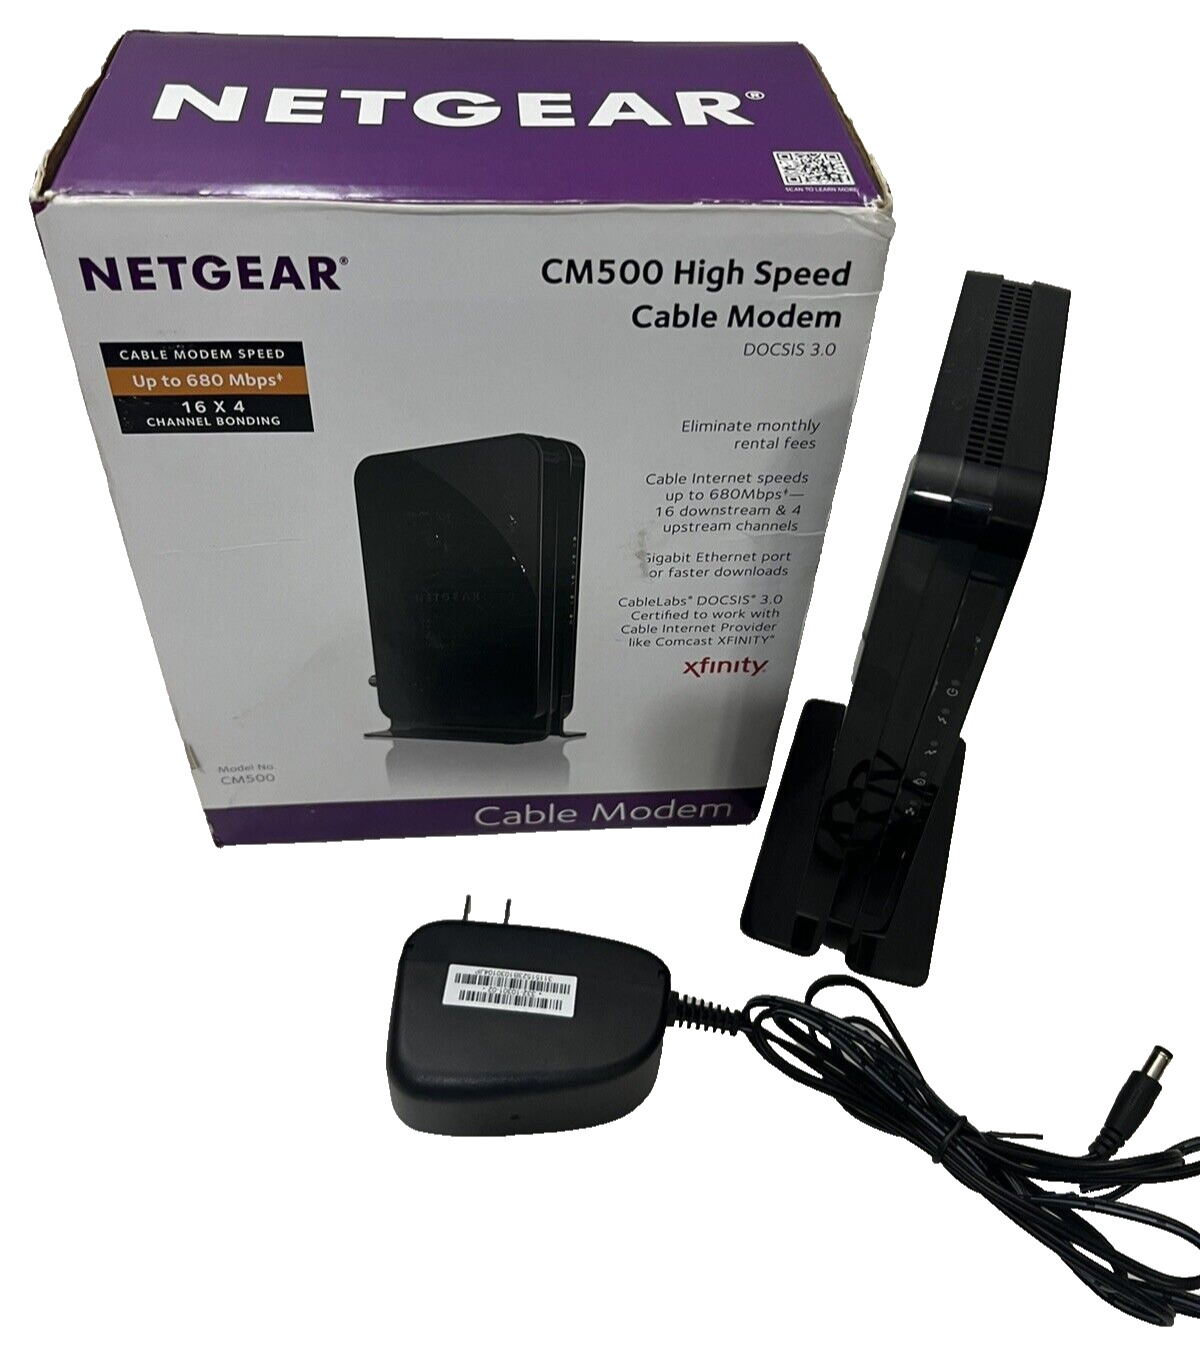 NETGEAR CM500 High Speed Cable Modem DOCSIS 3.0 Up To 680Mbps Open Box